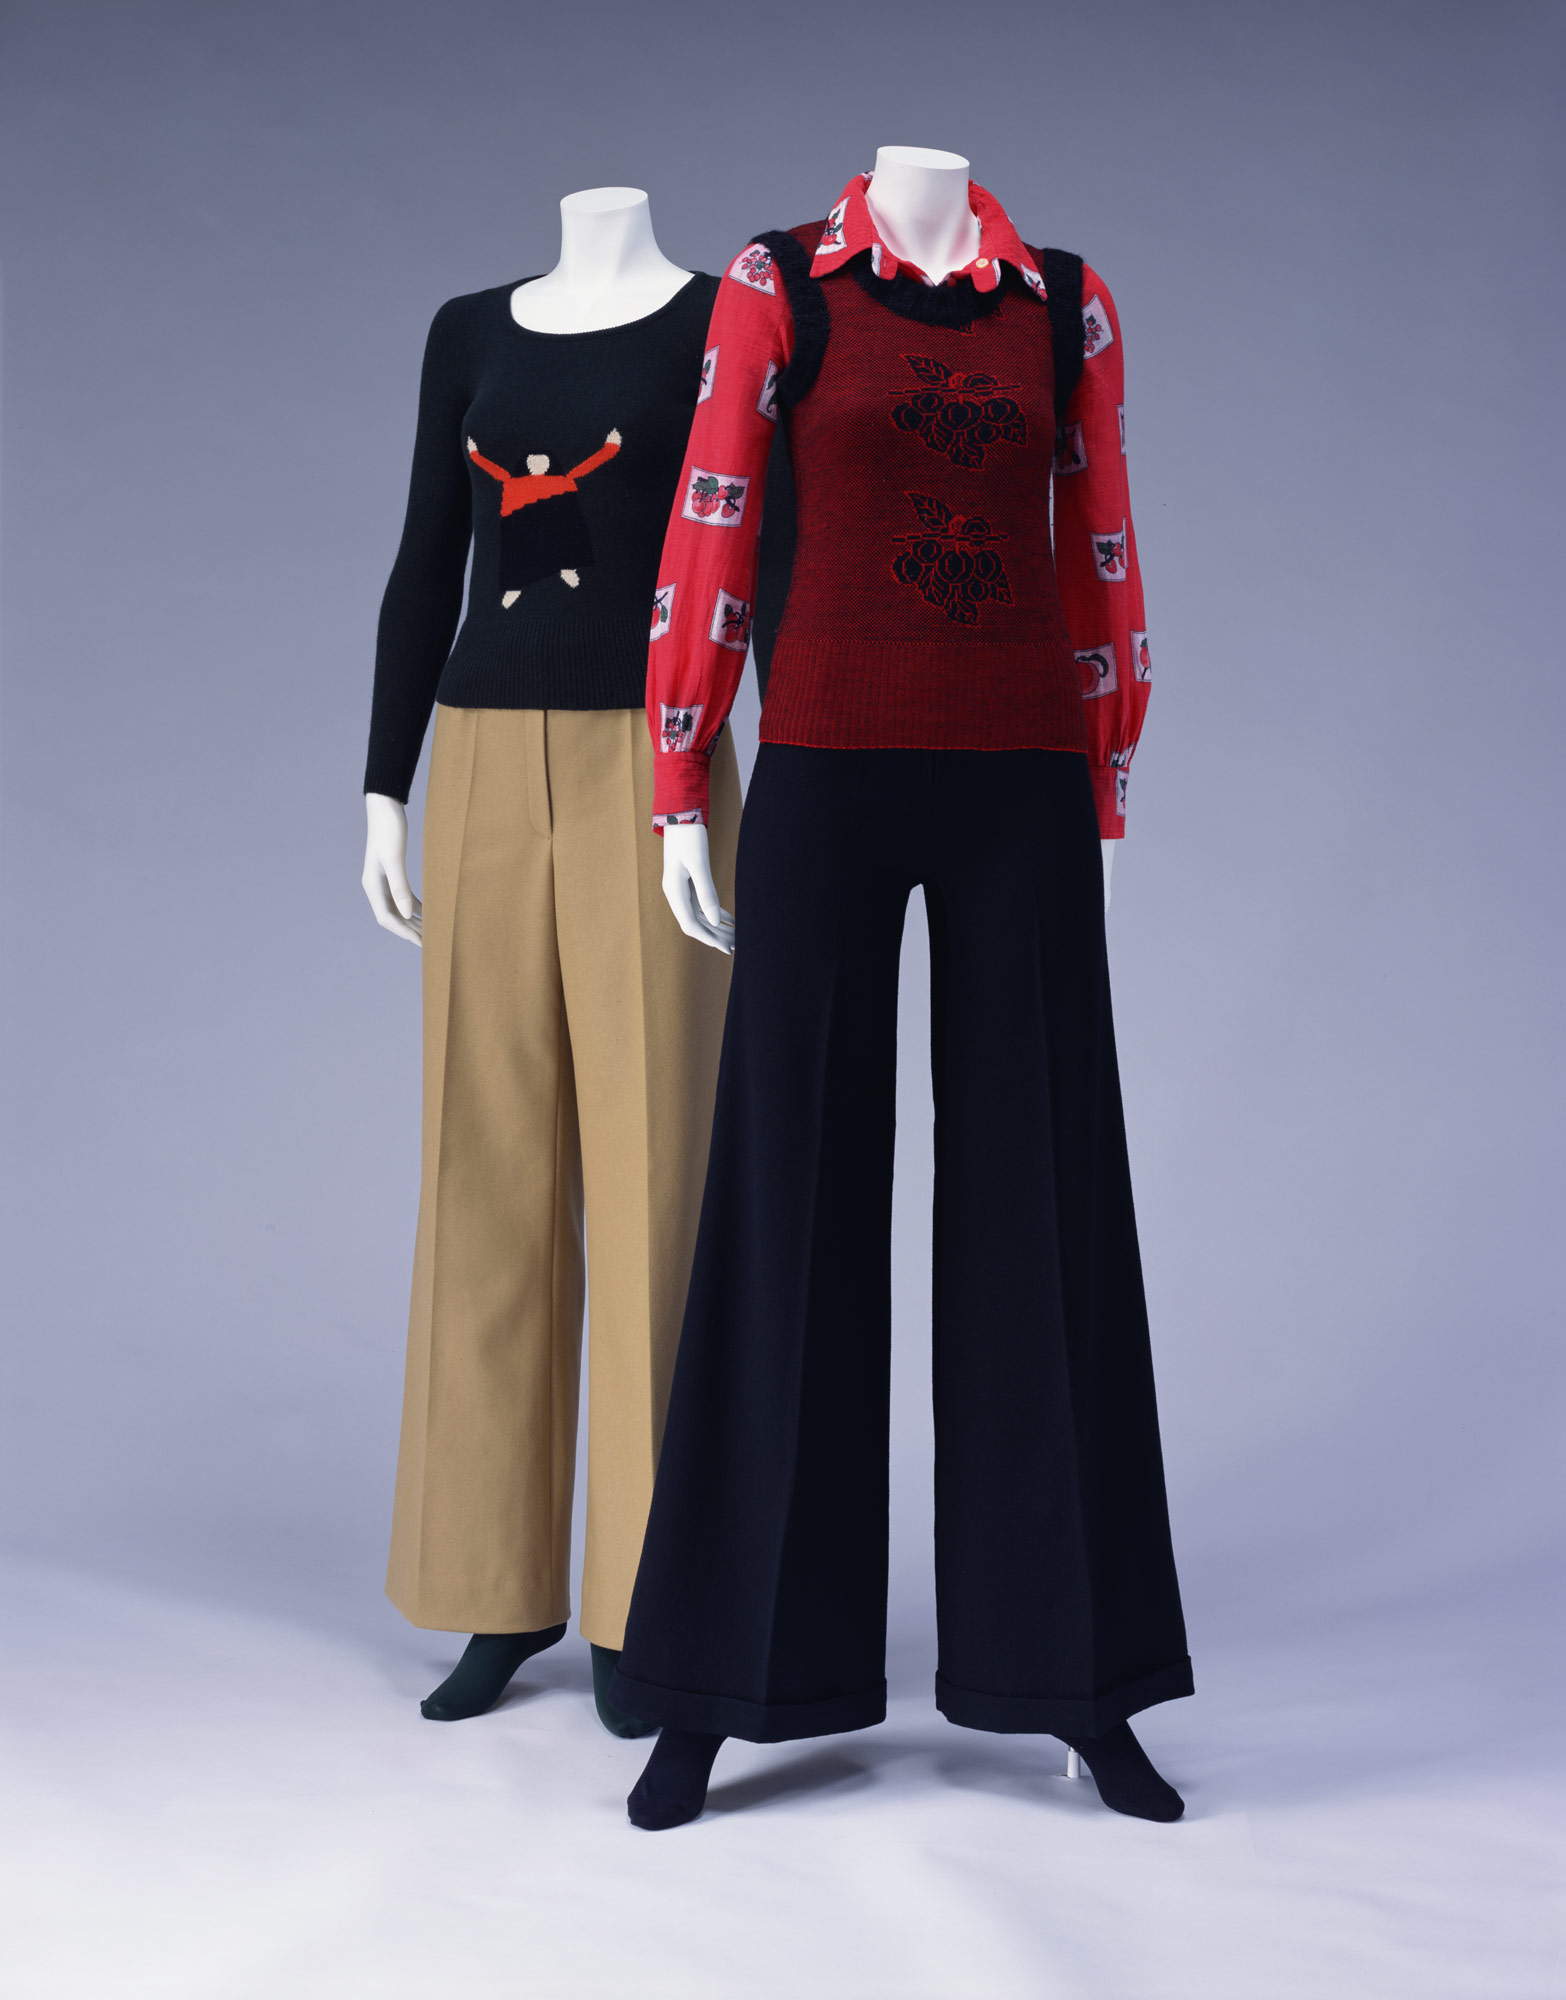 Sweater [Left] Blouse and Vest [Right]